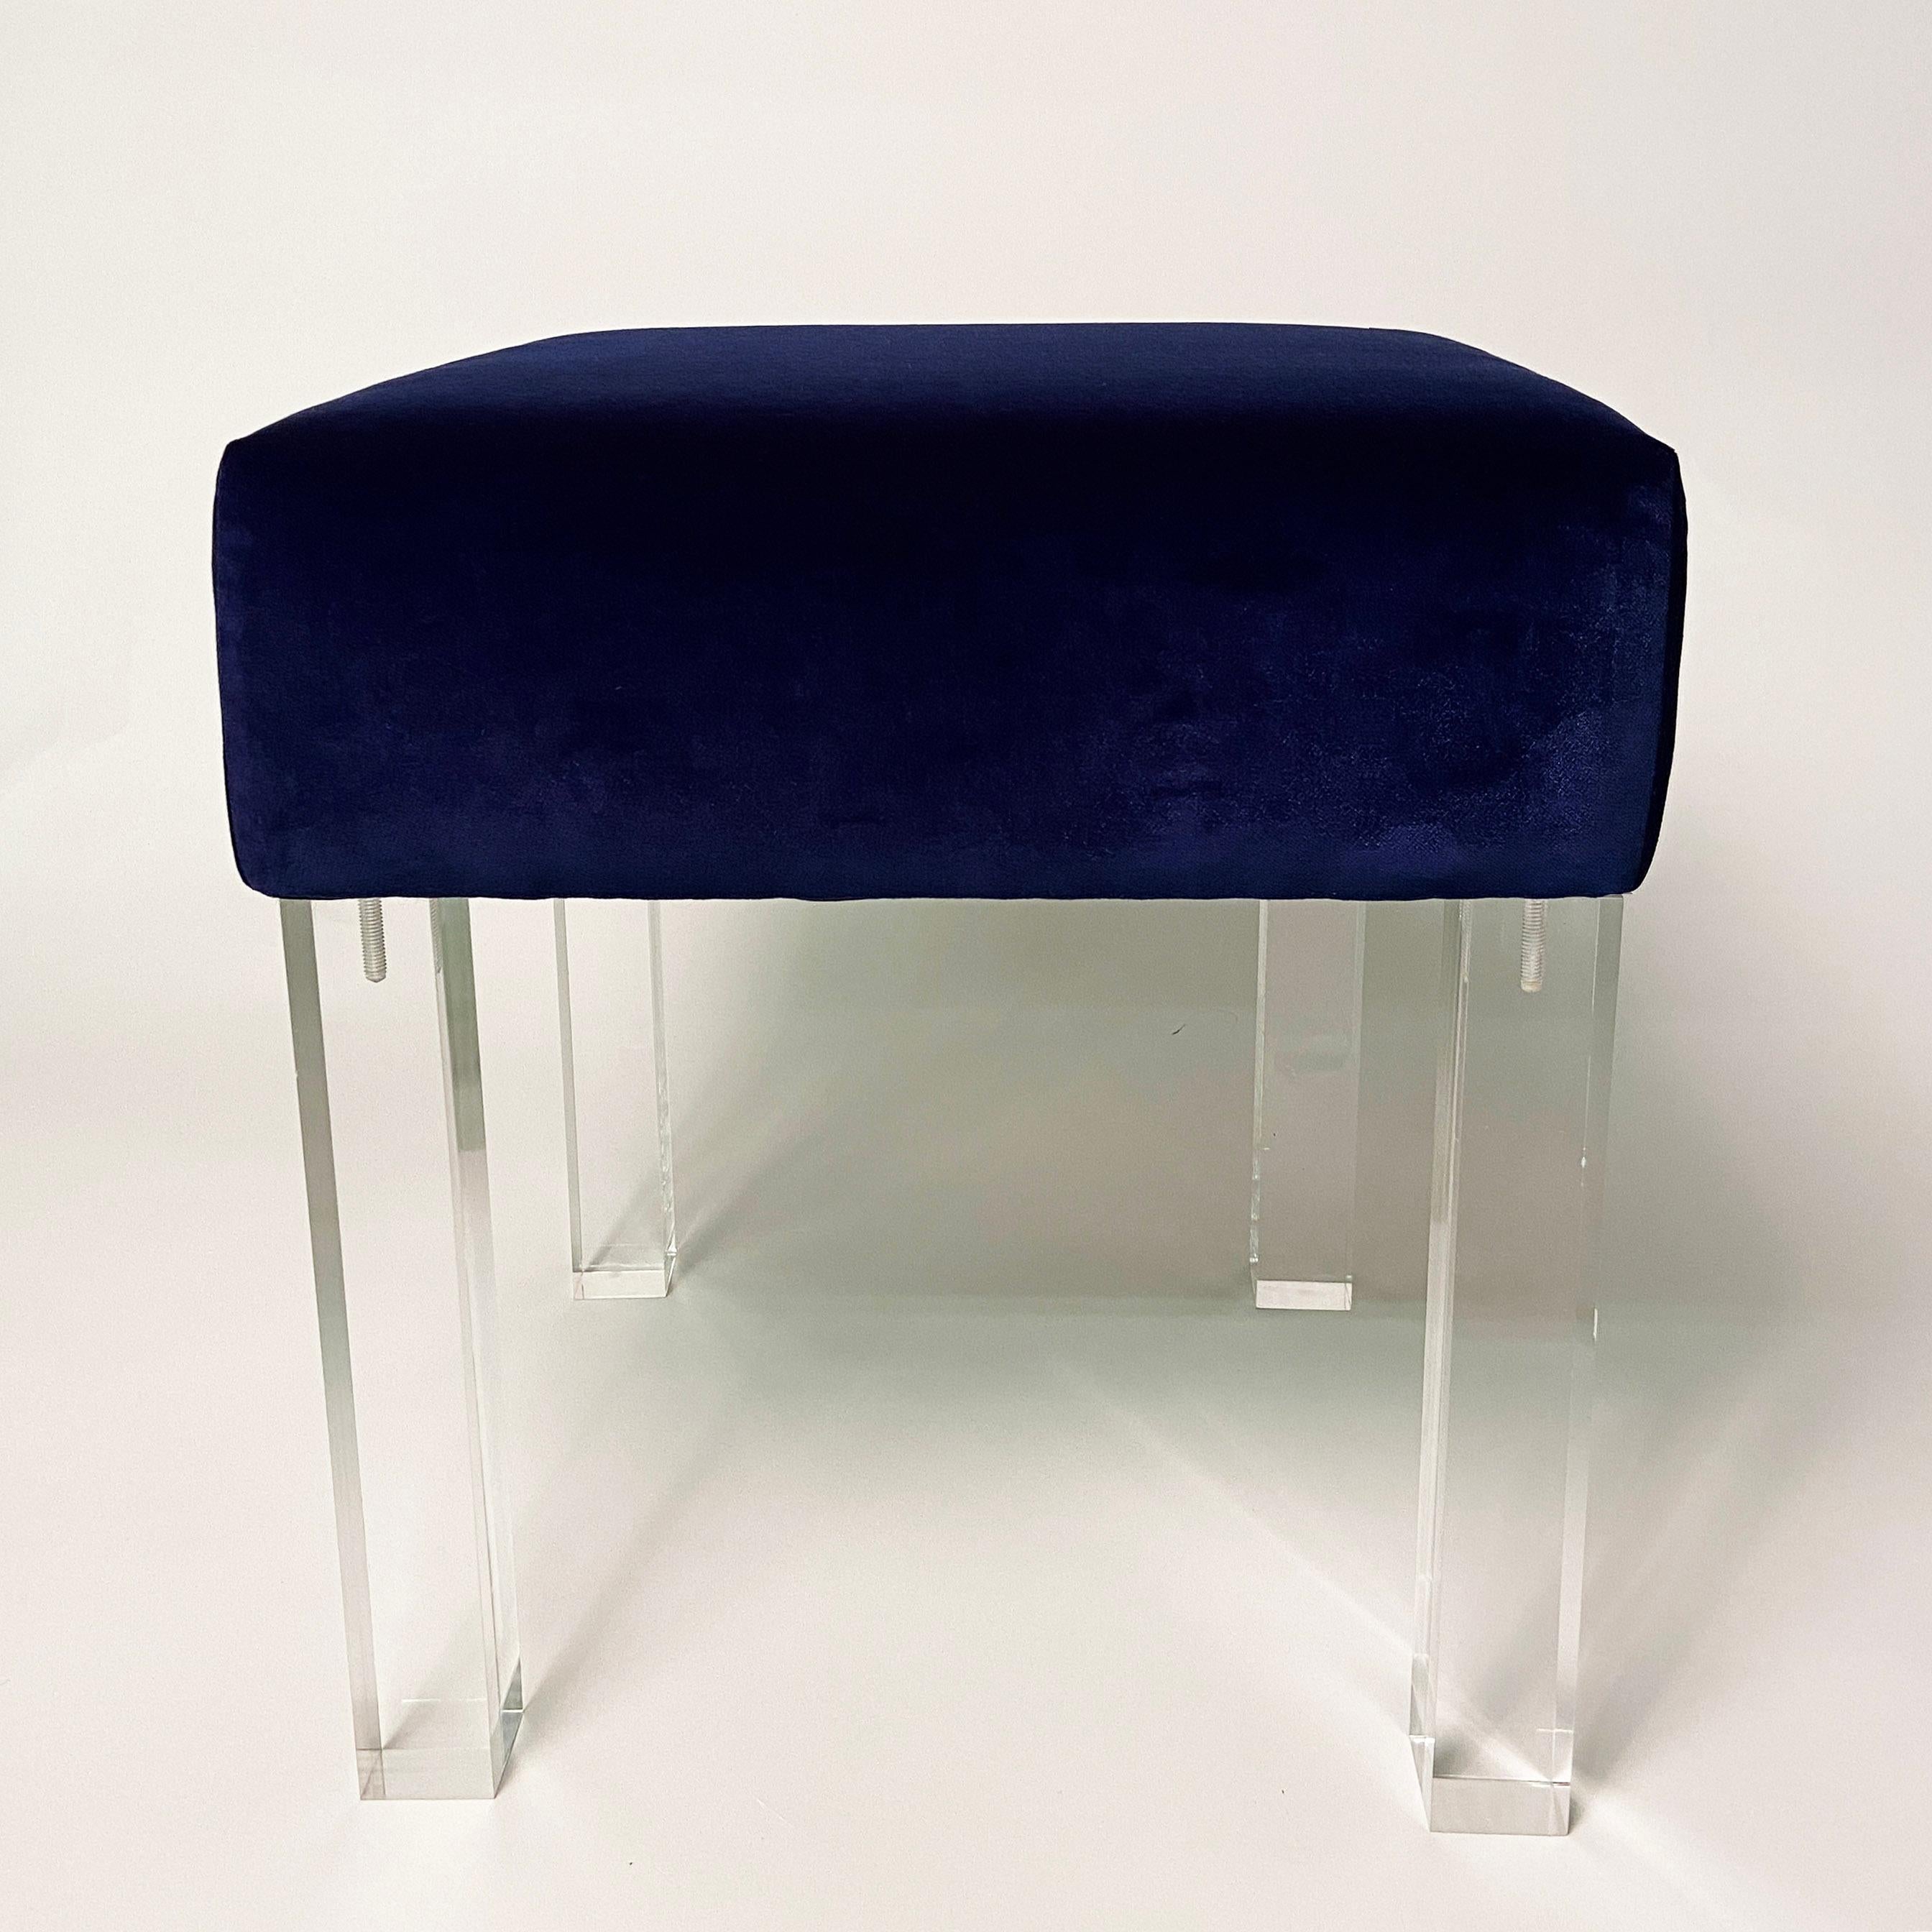 Stunning square low stool with cushion upholstered in fine navy velvet and installed with solid lucite legs. New and in excellent condition. Tuck under a console and pull out for extra seating, place near a fireplace, or at the end of a coffee